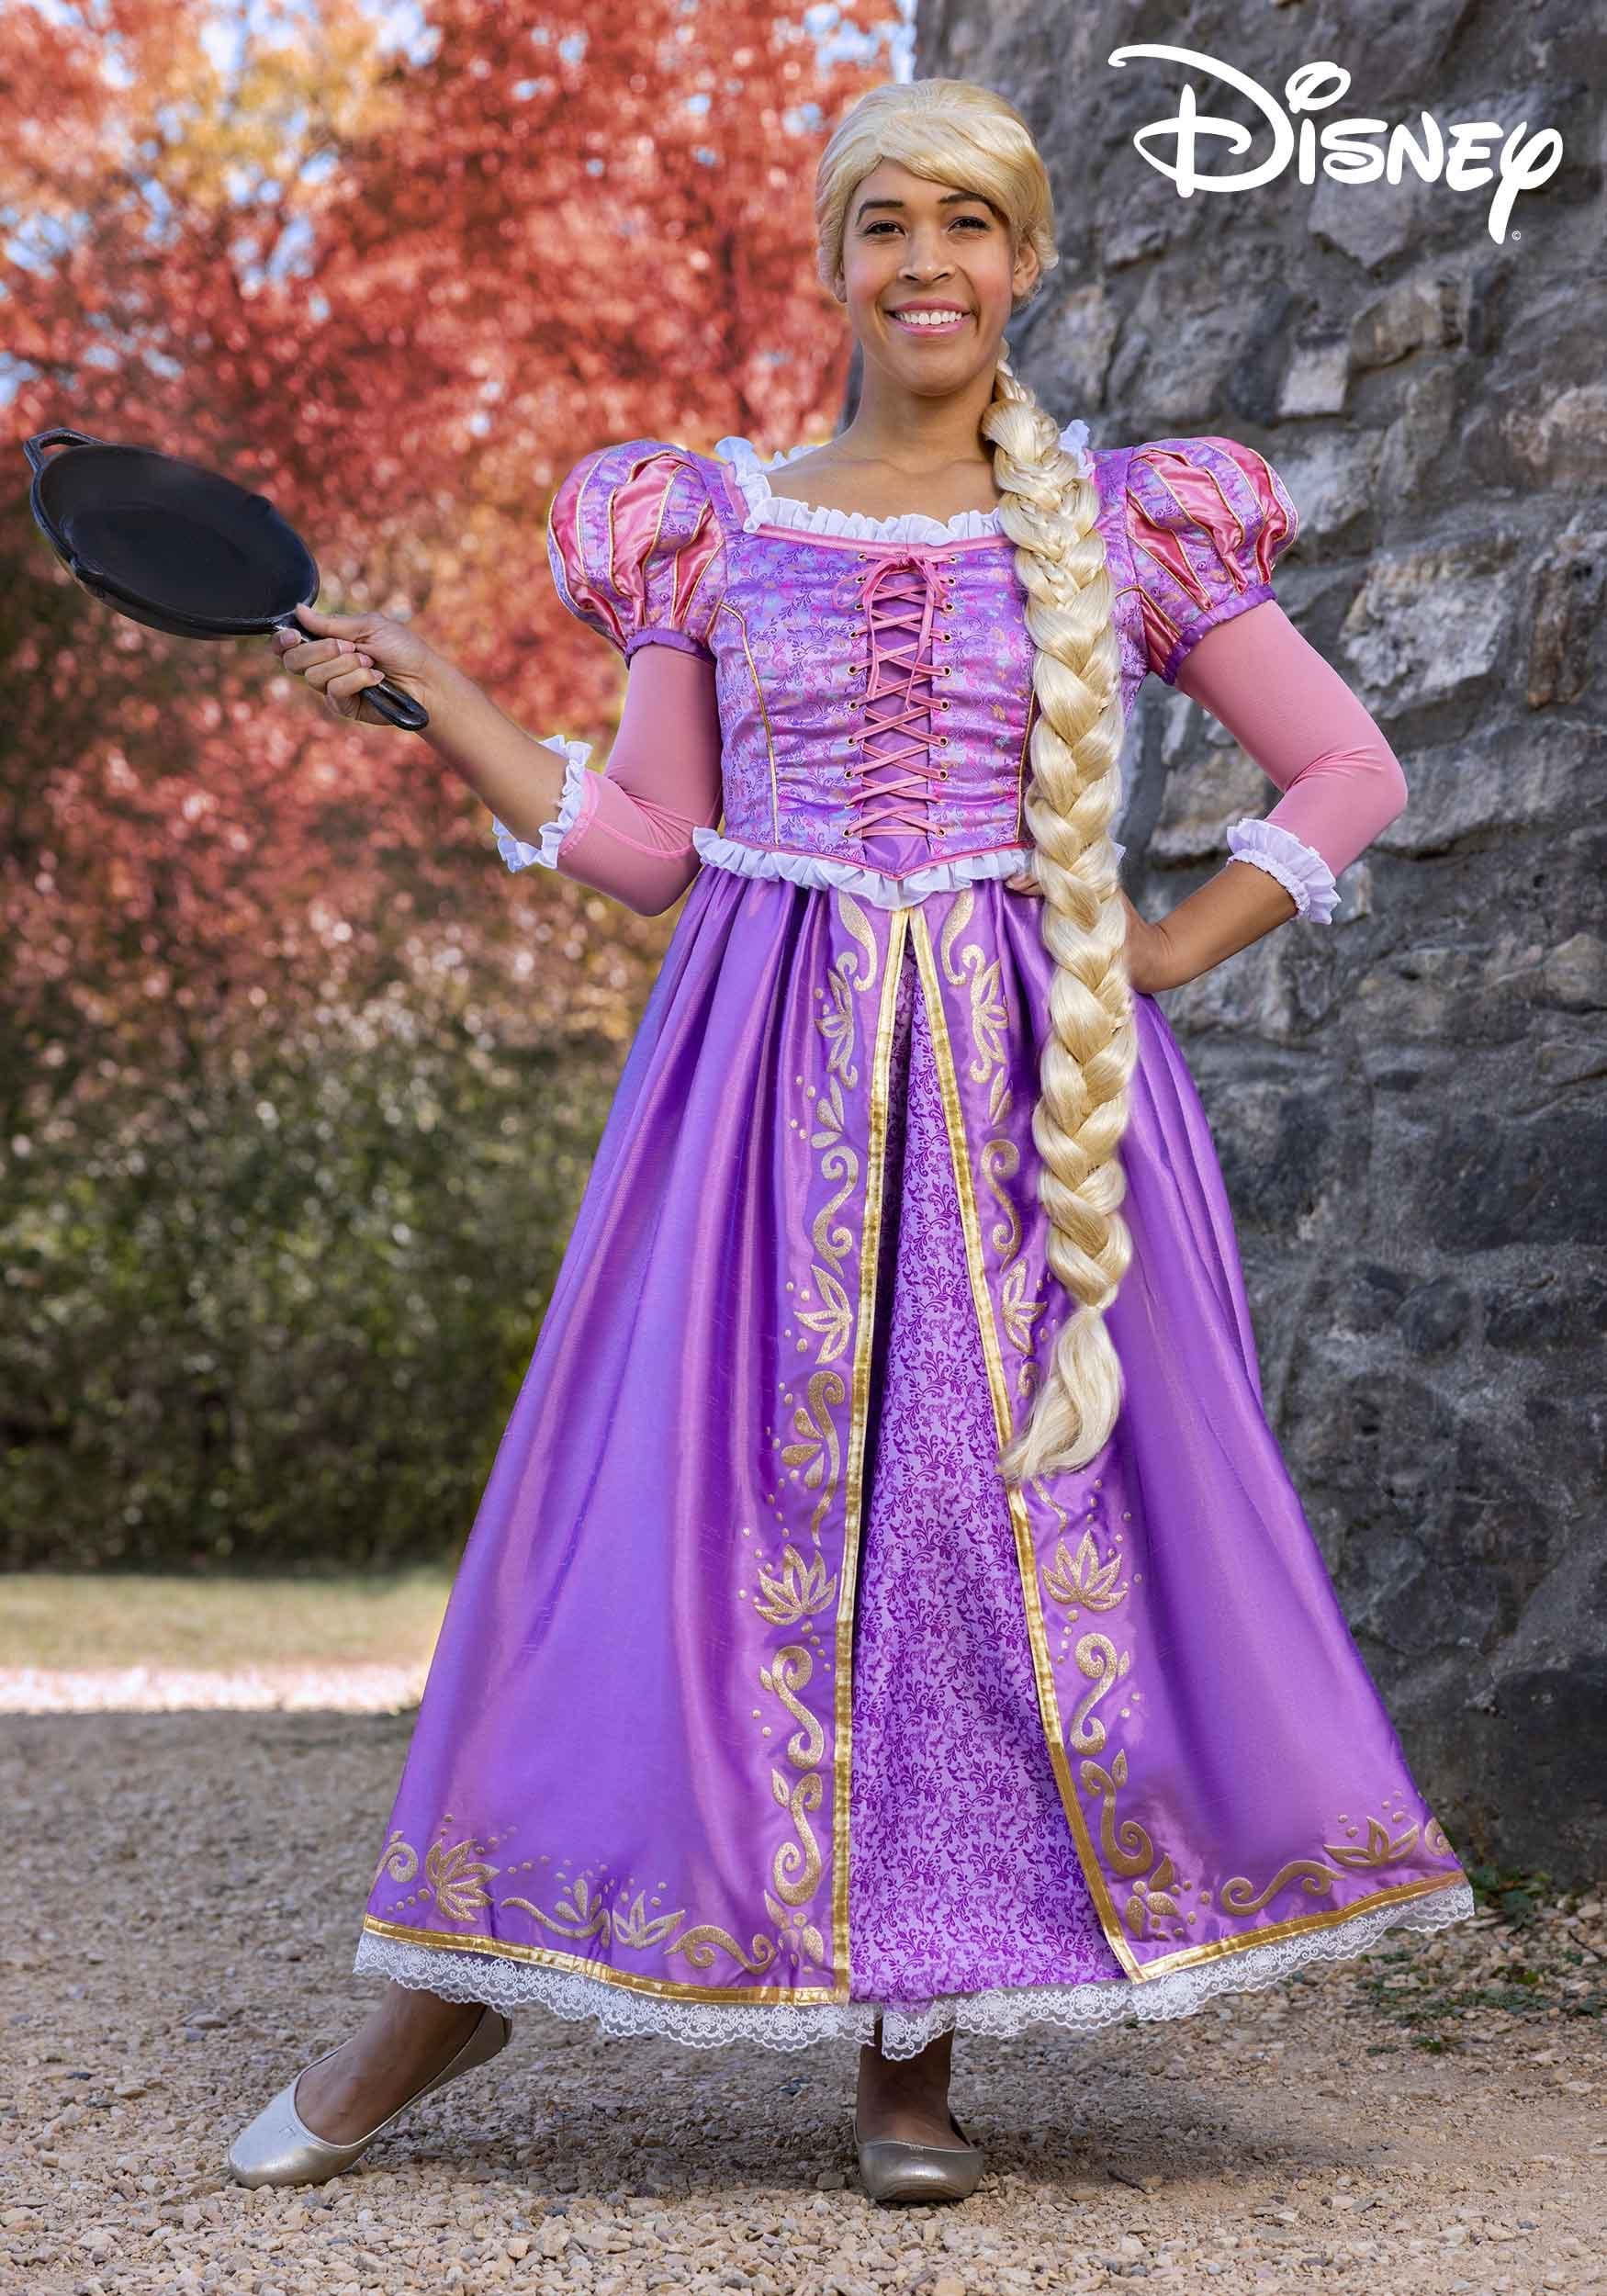 andria alexander add pictures of rapunzel photo